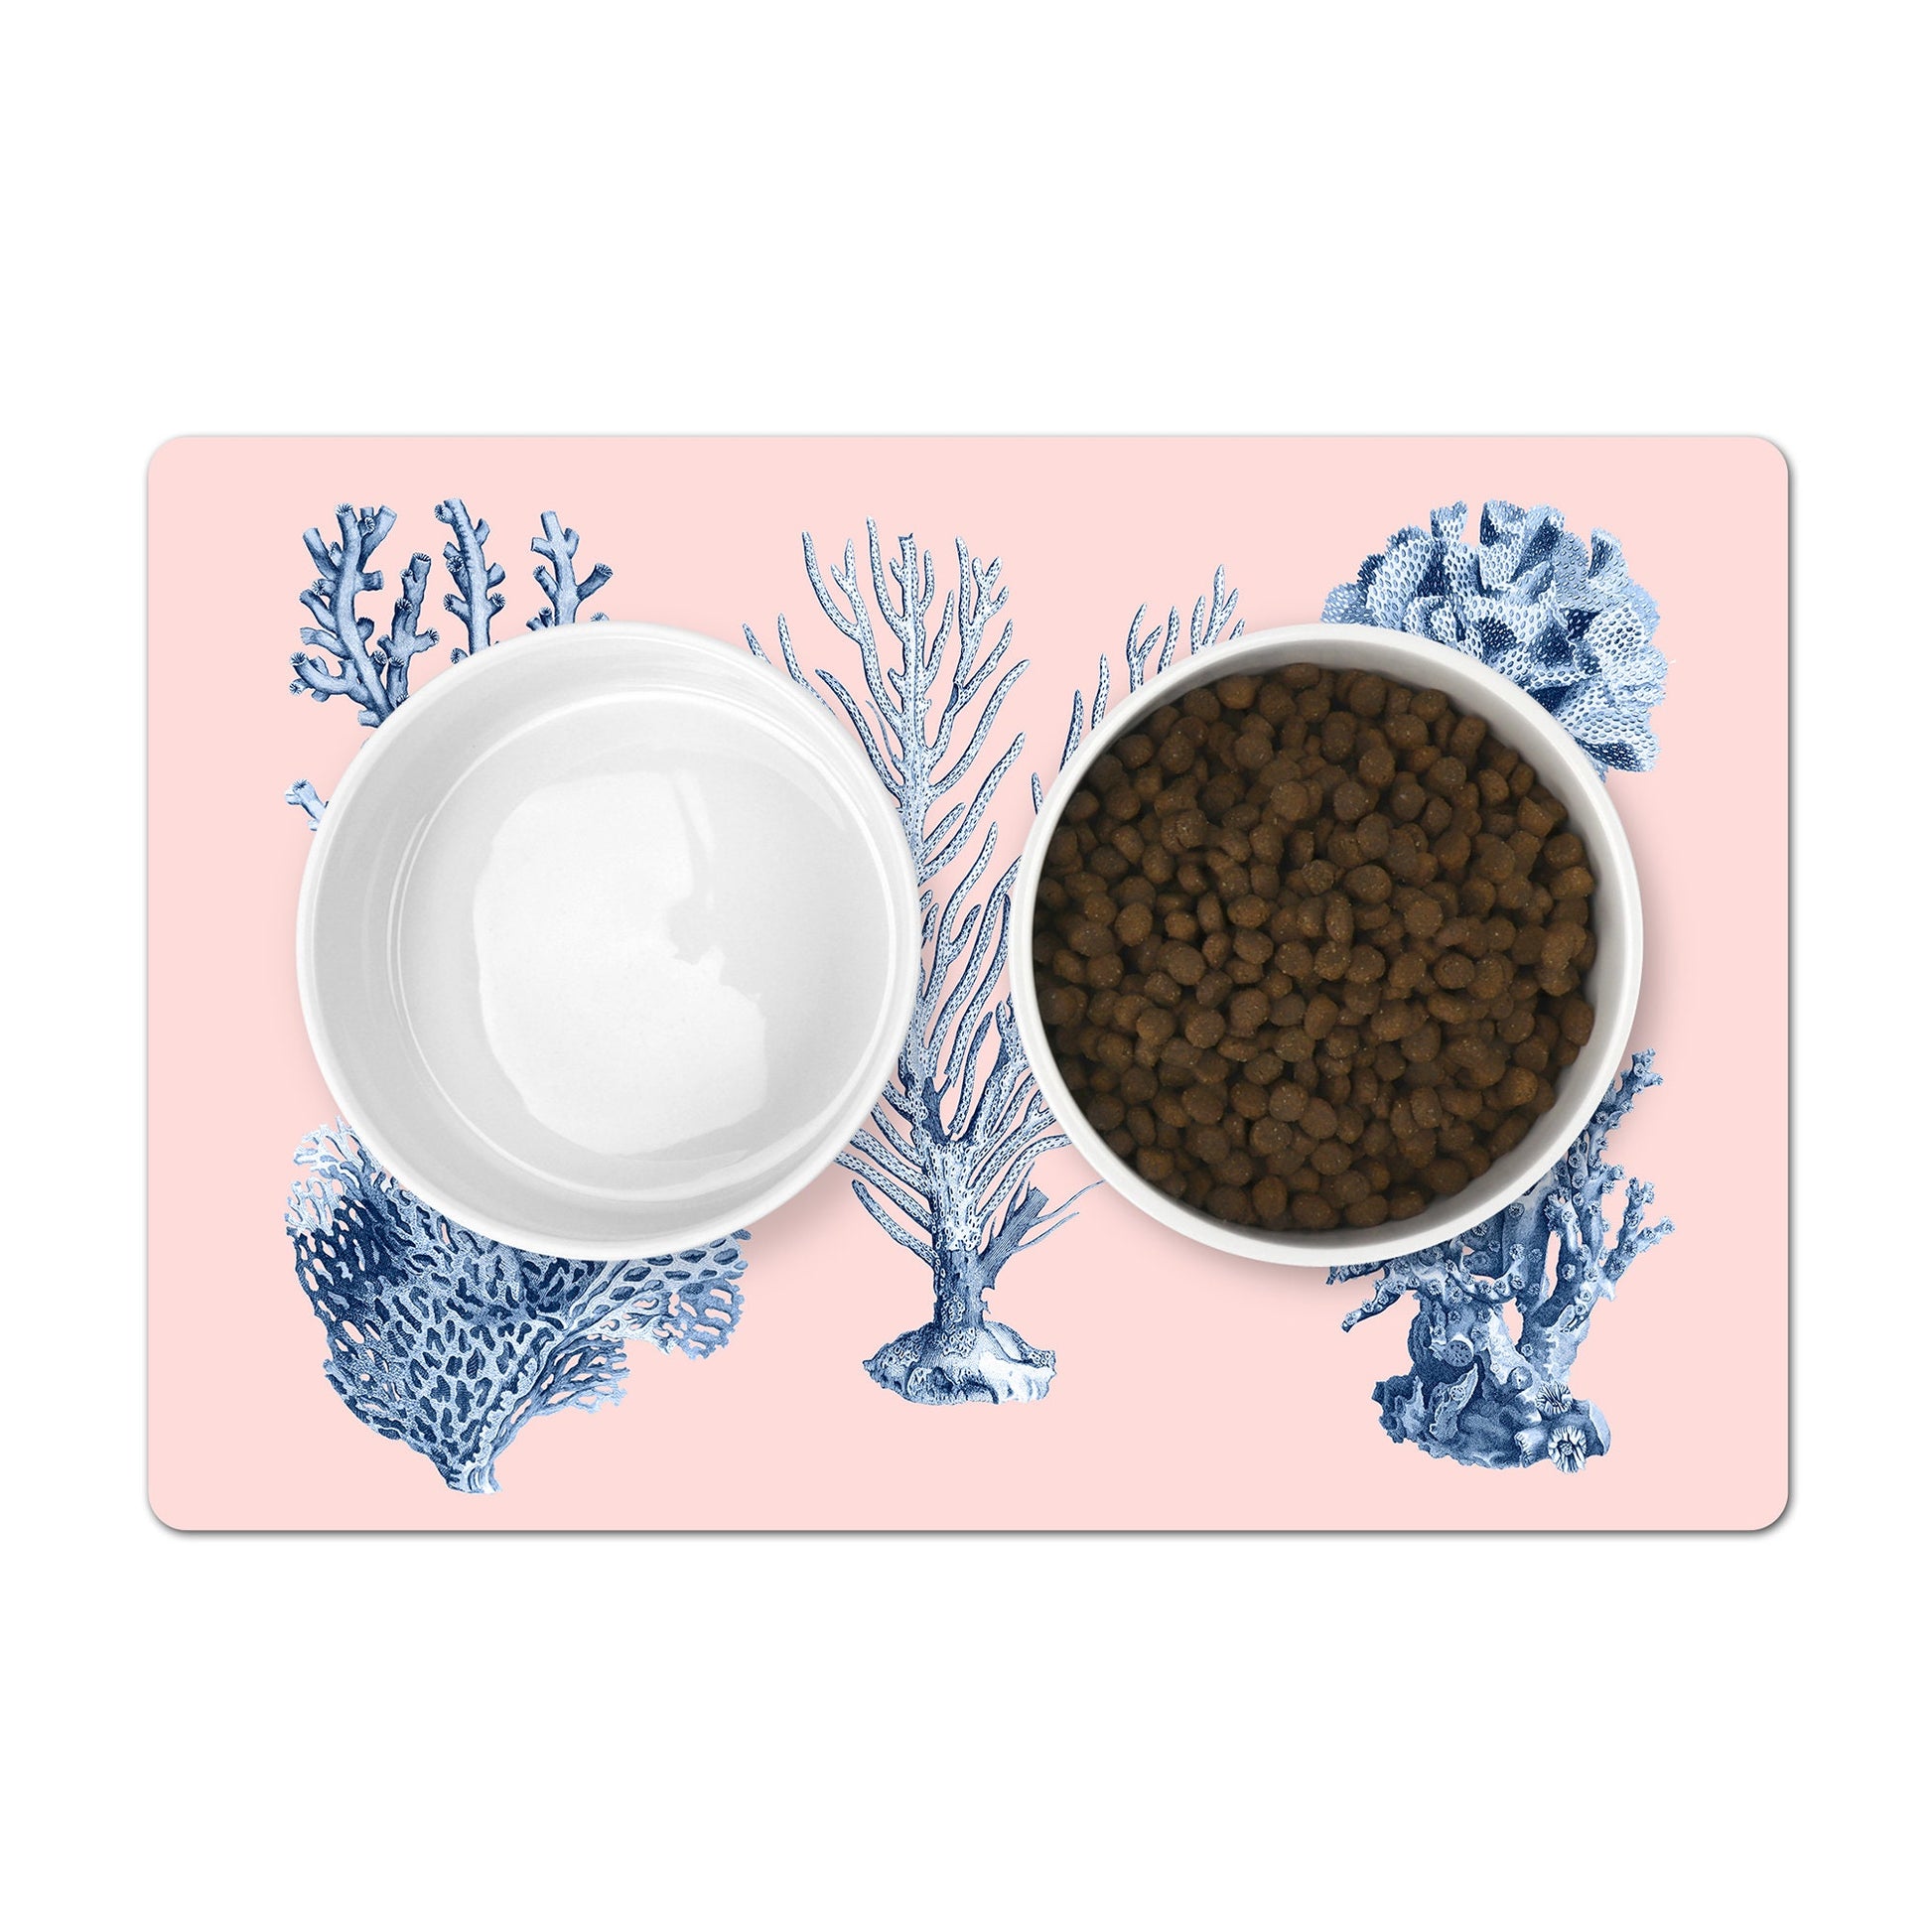 Dog & Cat Bowl Mat in blush pink featuring  blue sea coral print.